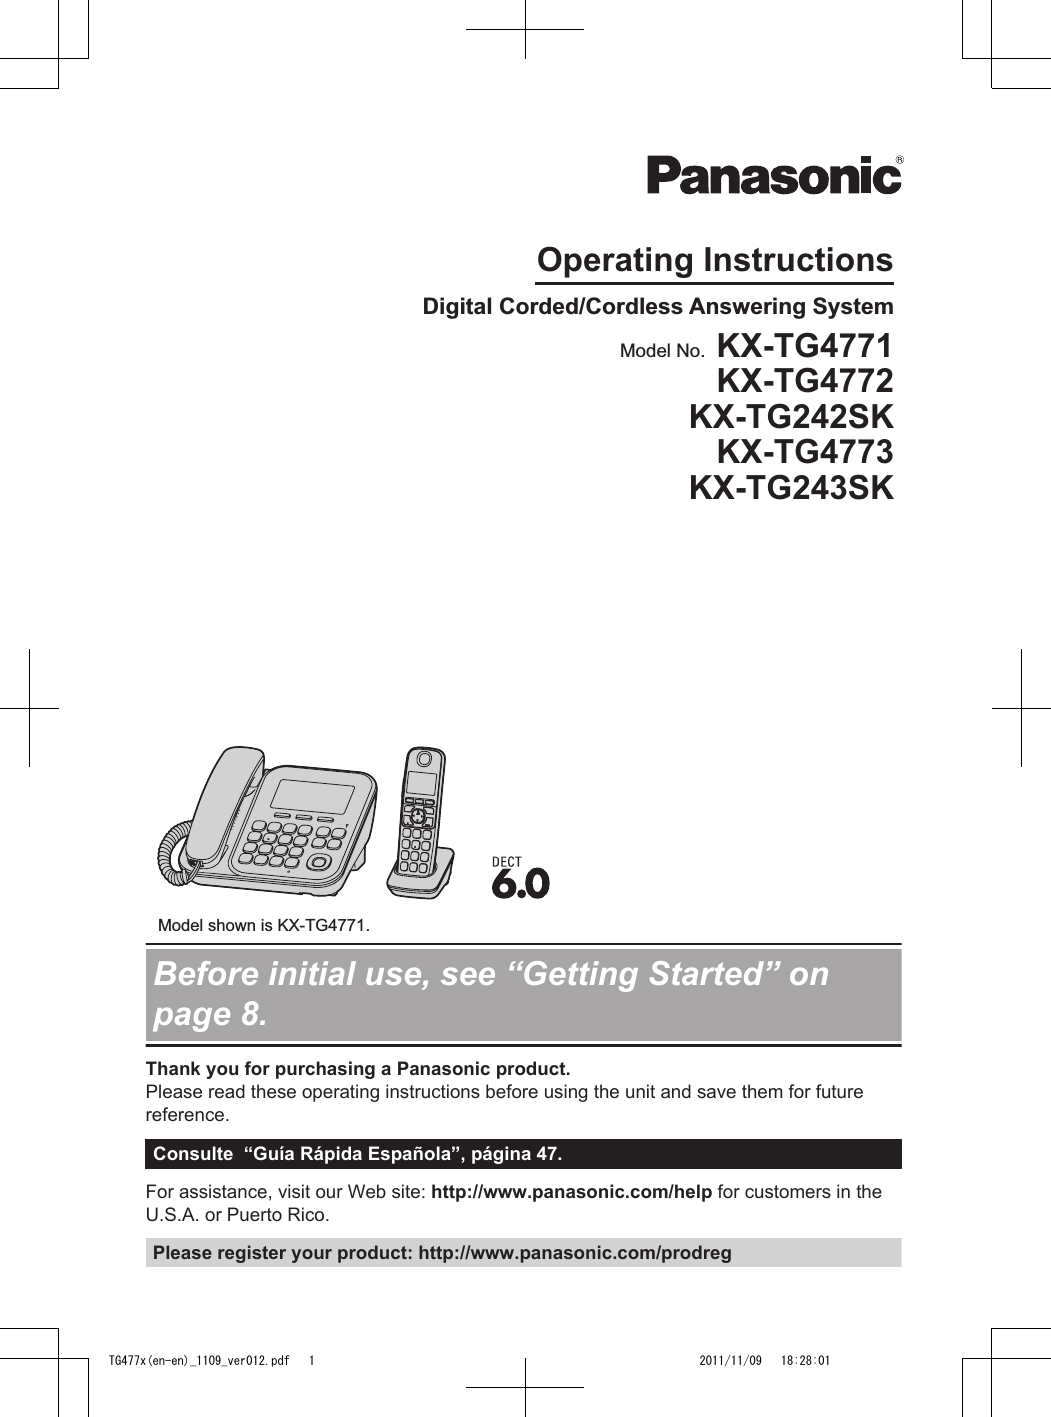 Operating InstructionsDigital Corded/Cordless Answering System Model shown is KX-TG4771.Model No.  KX-TG4771KX-TG4772KX-TG242SKKX-TG4773KX-TG243SKBefore initial use, see “Getting Started” onpage 8.Thank you for purchasing a Panasonic product.Please read these operating instructions before using the unit and save them for futurereference.Consulte  “Guía Rápida Española”, página 47.For assistance, visit our Web site: http://www.panasonic.com/help for customers in theU.S.A. or Puerto Rico.Please register your product: http://www.panasonic.com/prodregTG477x(en-en)_1109_ver012.pdf   1 2011/11/09   18:28:01